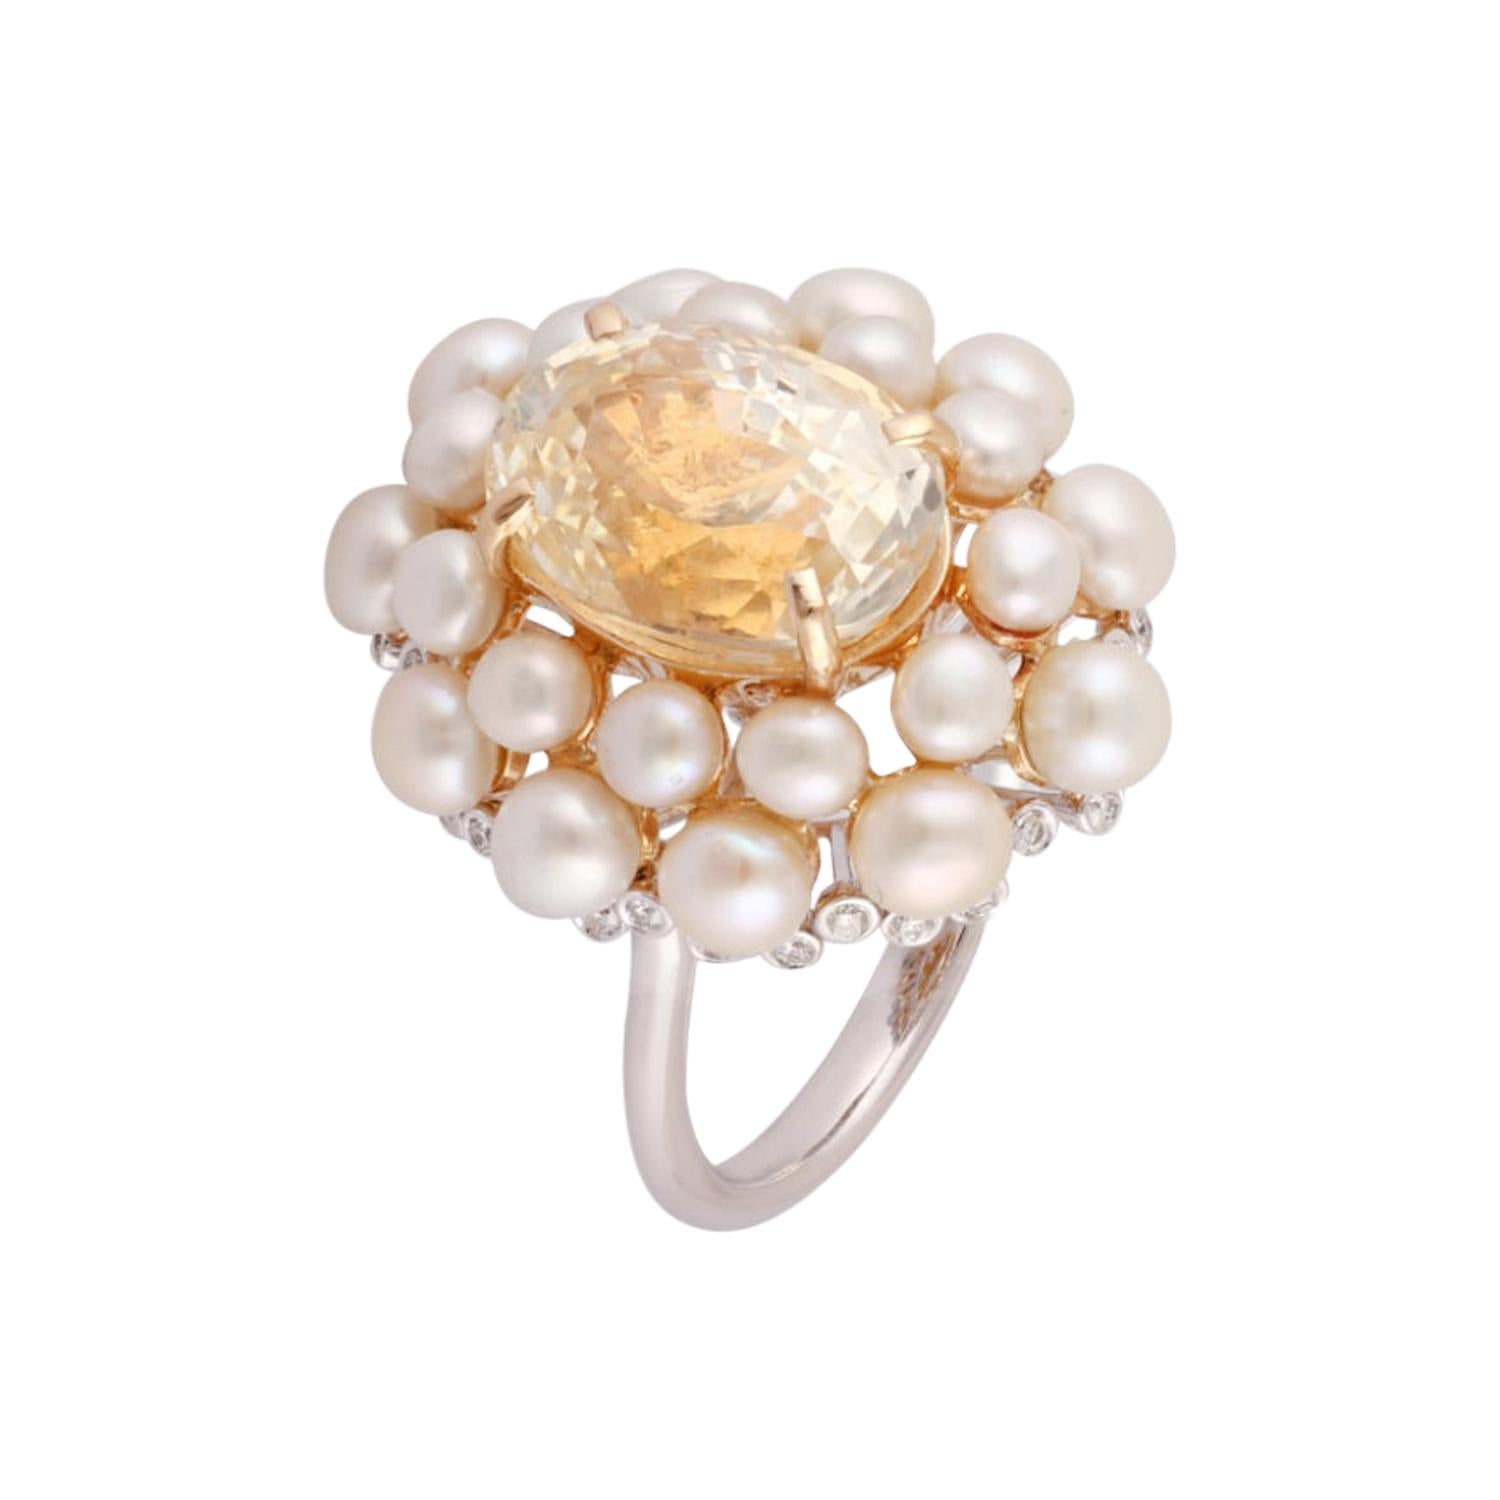 7.82 Carat Yellow Sapphire, Pearl and Diamond Ring Studded in 18 Karat Gold